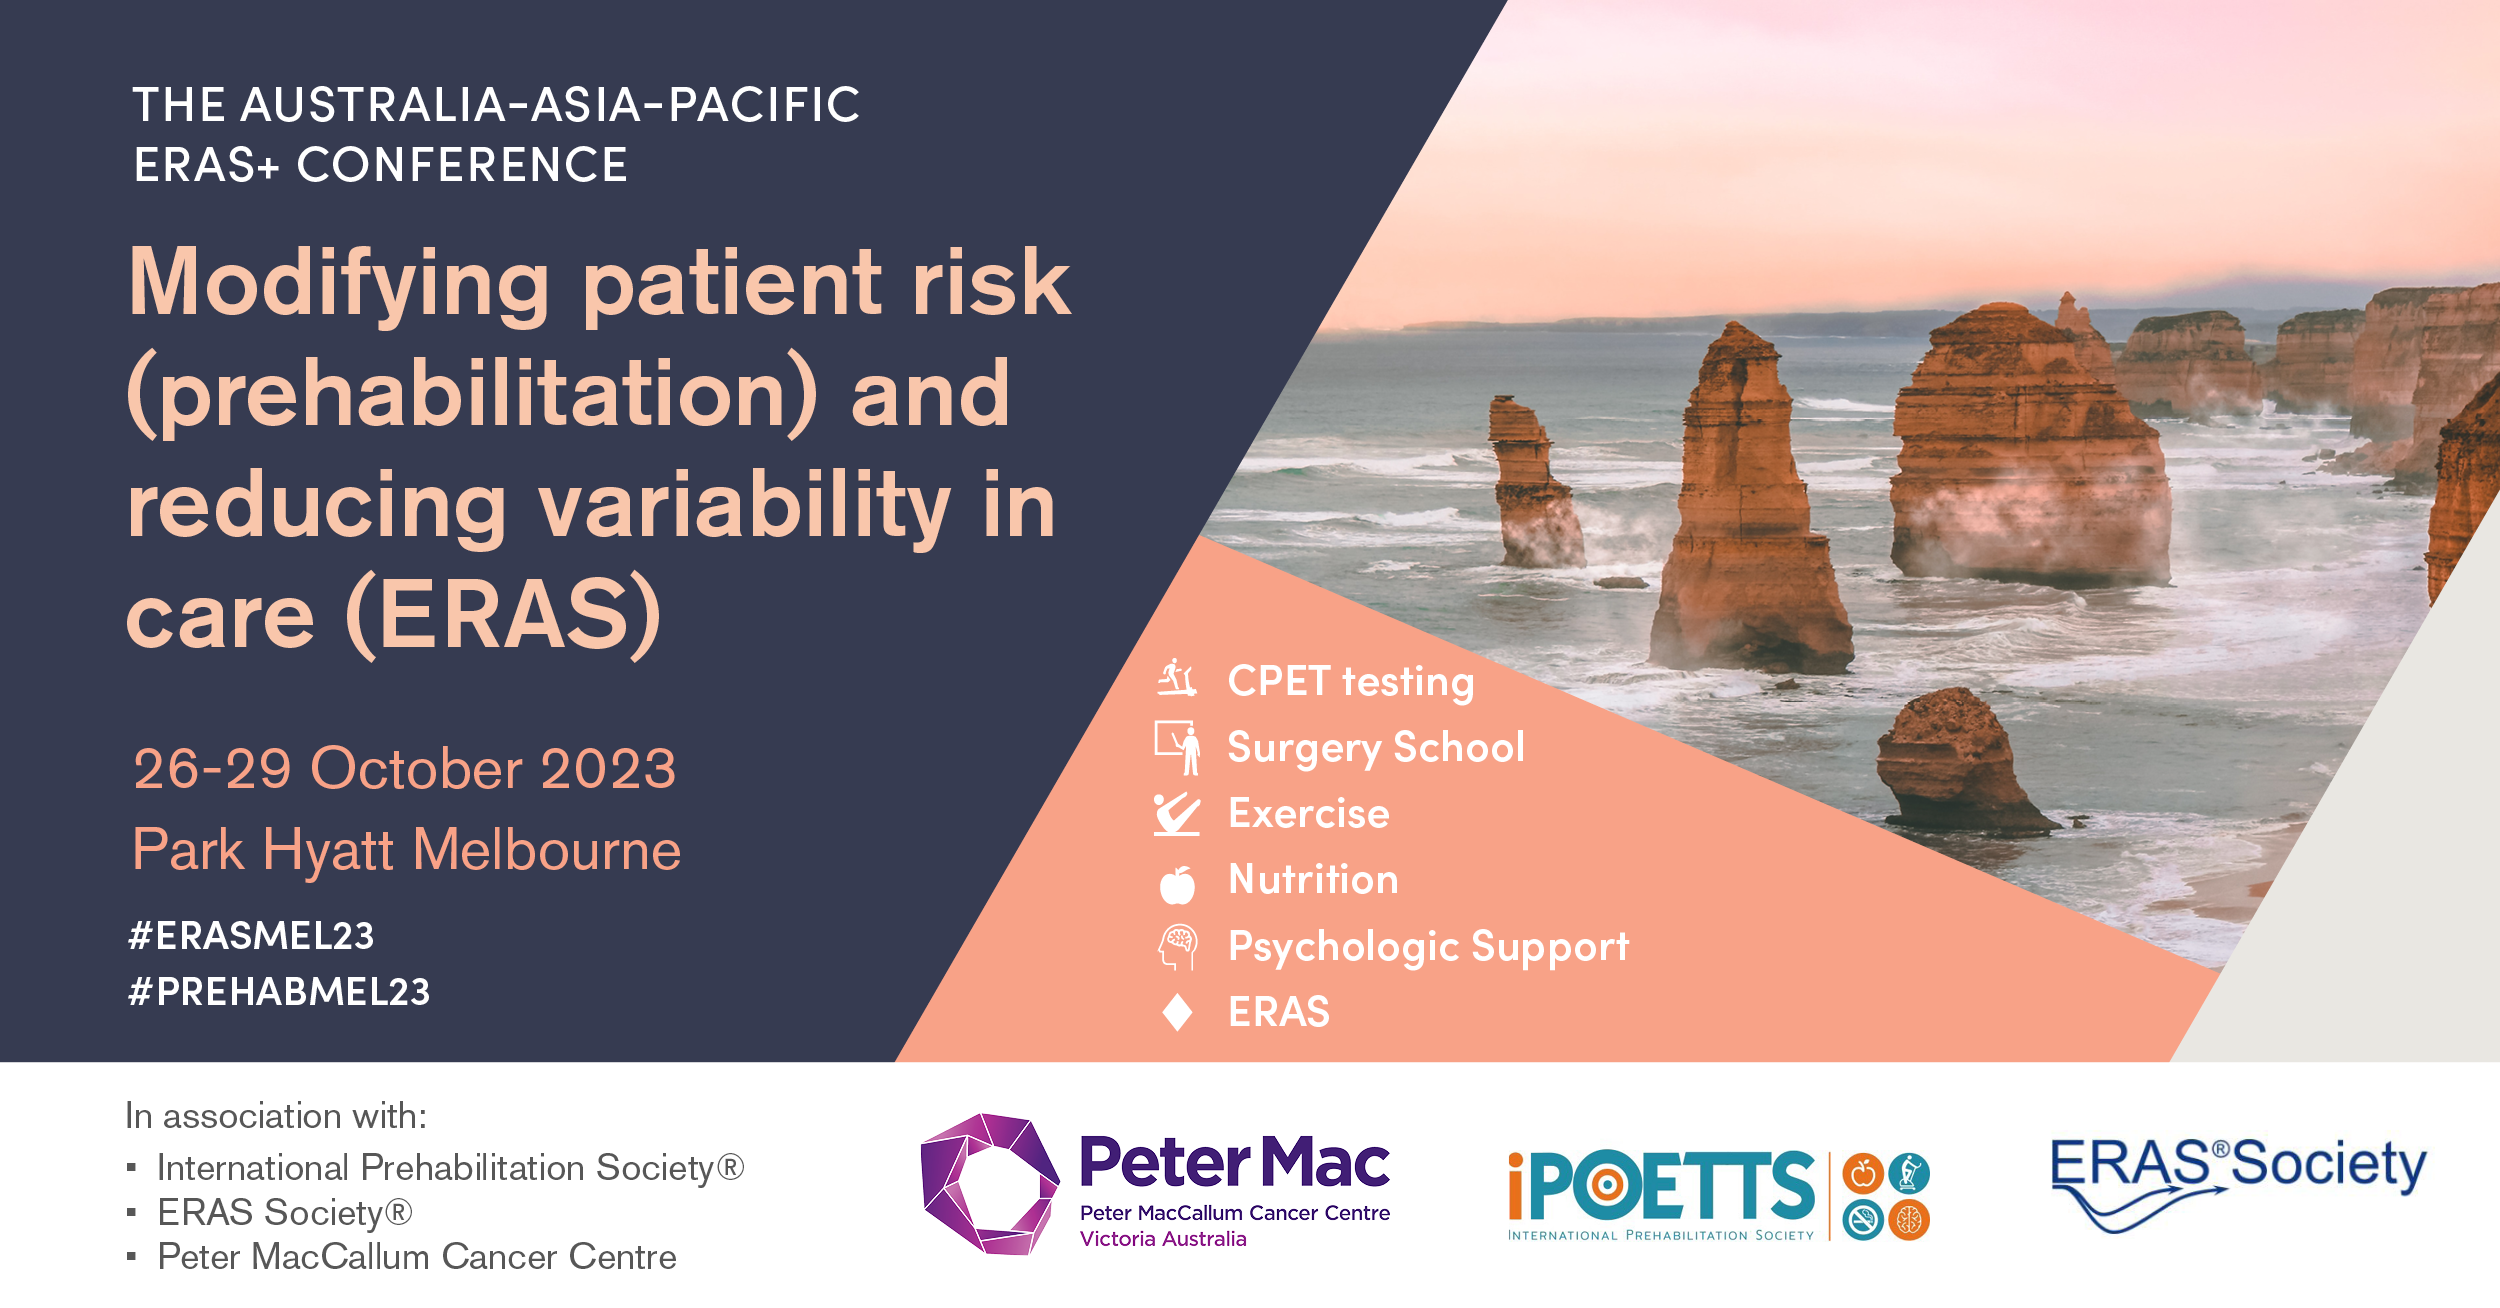 2023 Australia Asia Pacific ERAS Conference: Modifying patient risk (prehabilitation) and reducing variability in care